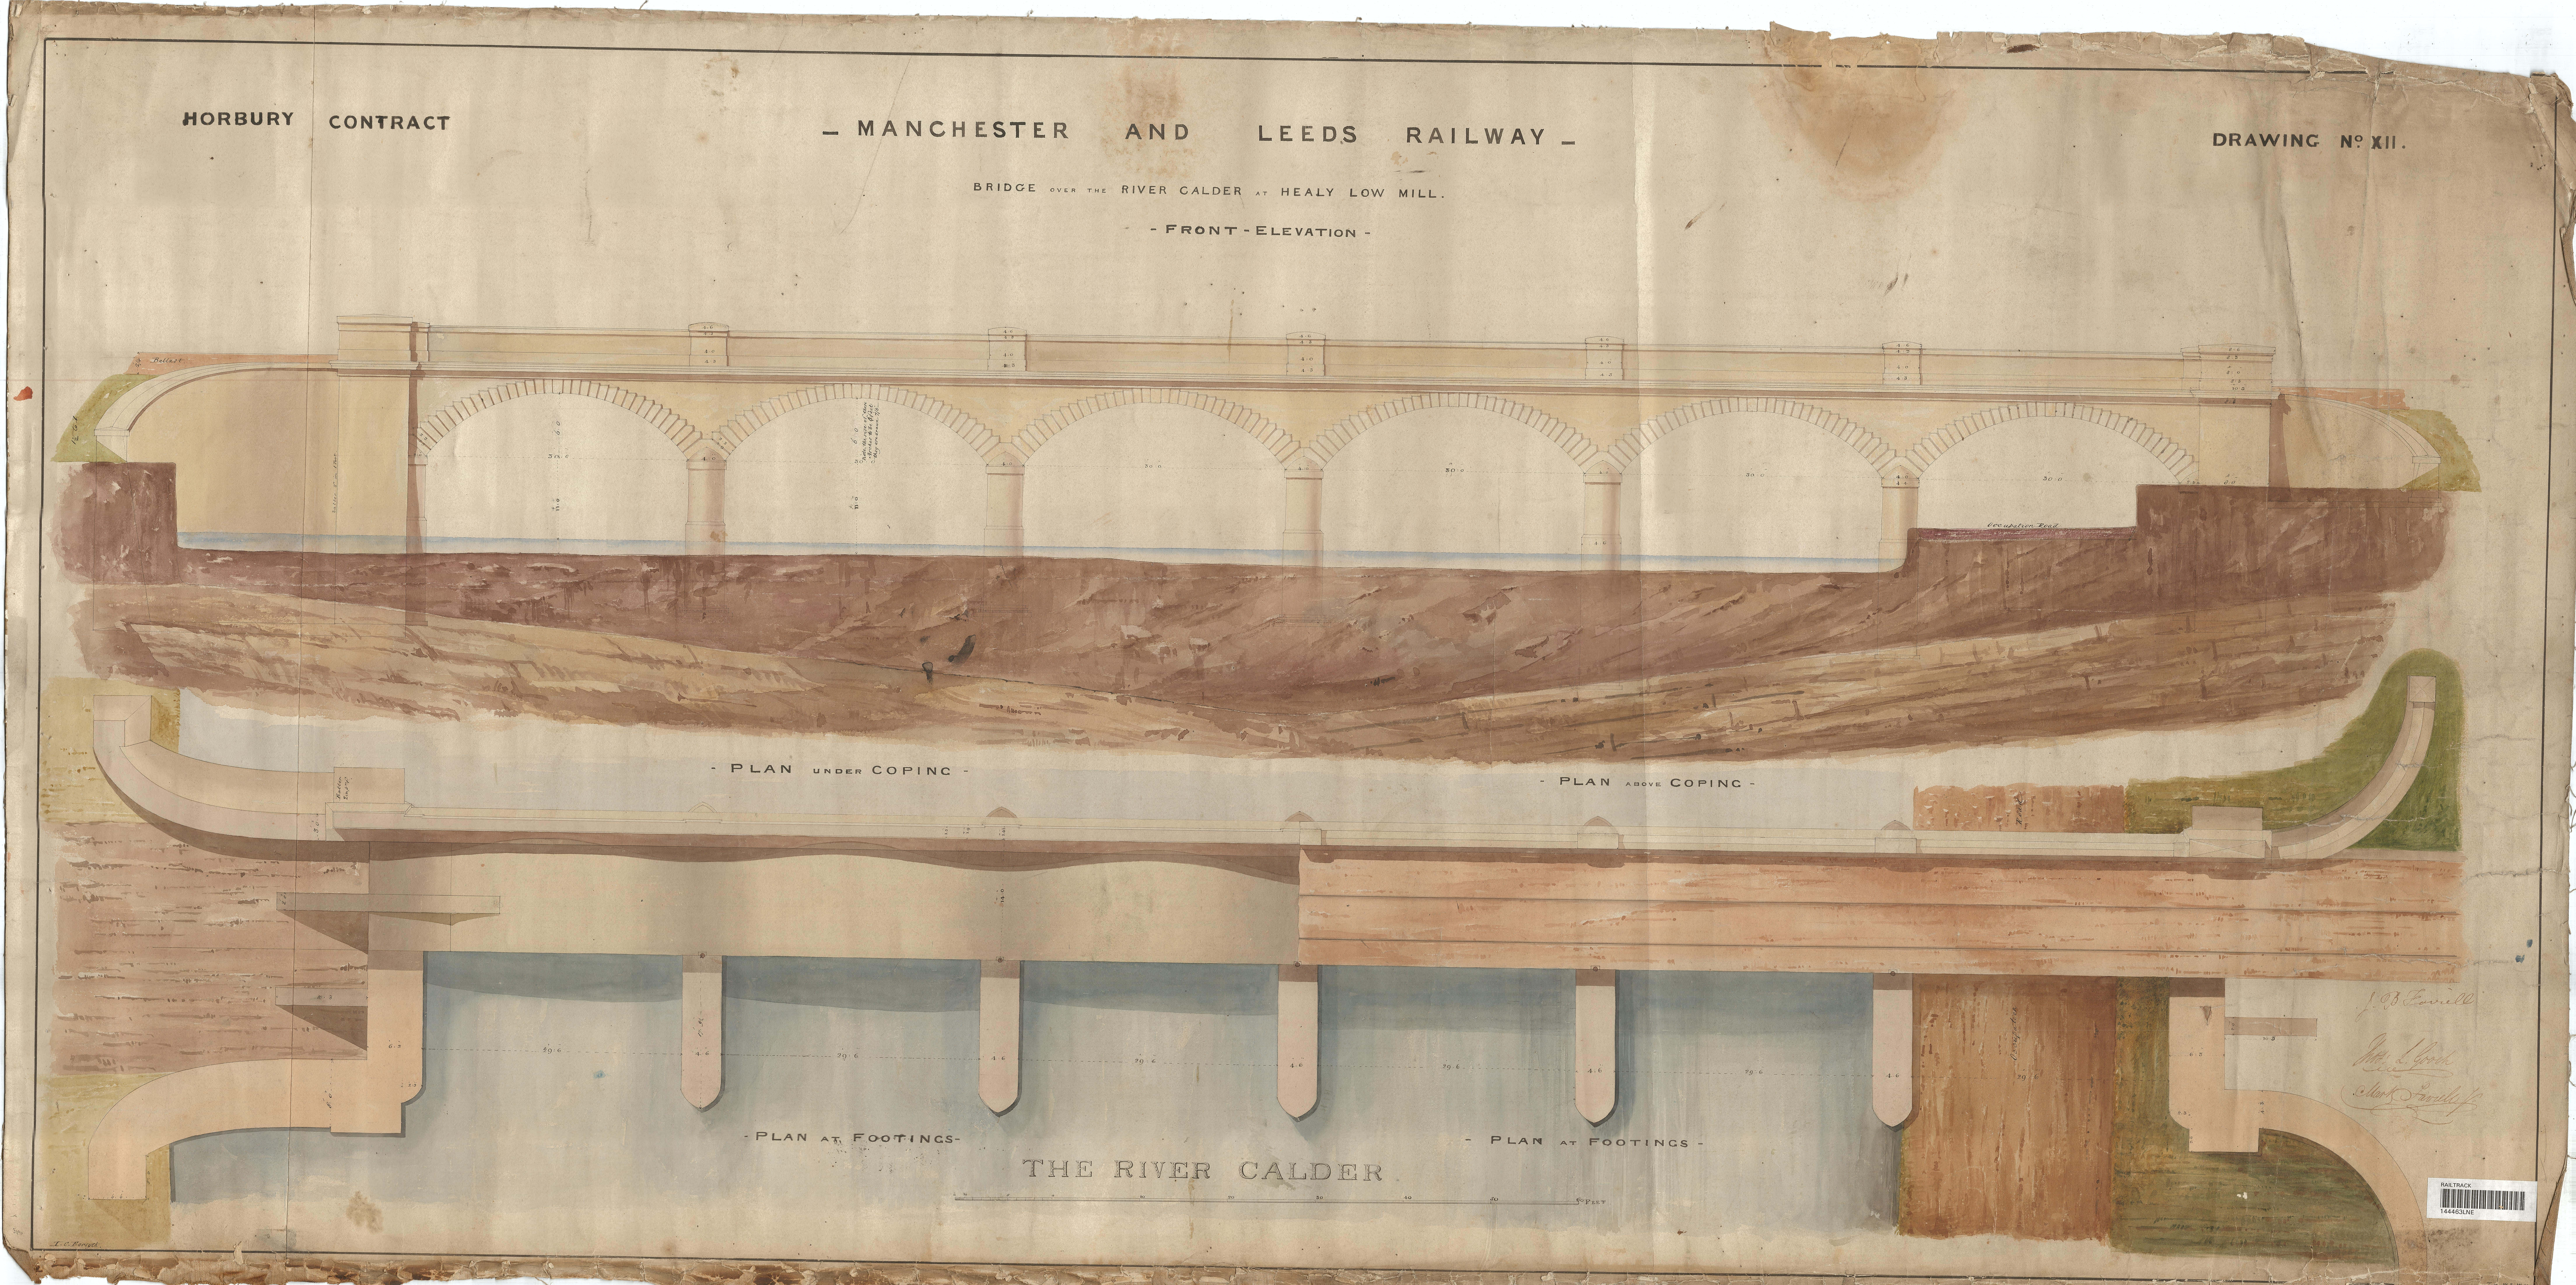 Original archive drawing for a bridge on the Manchester and Leeds Railway